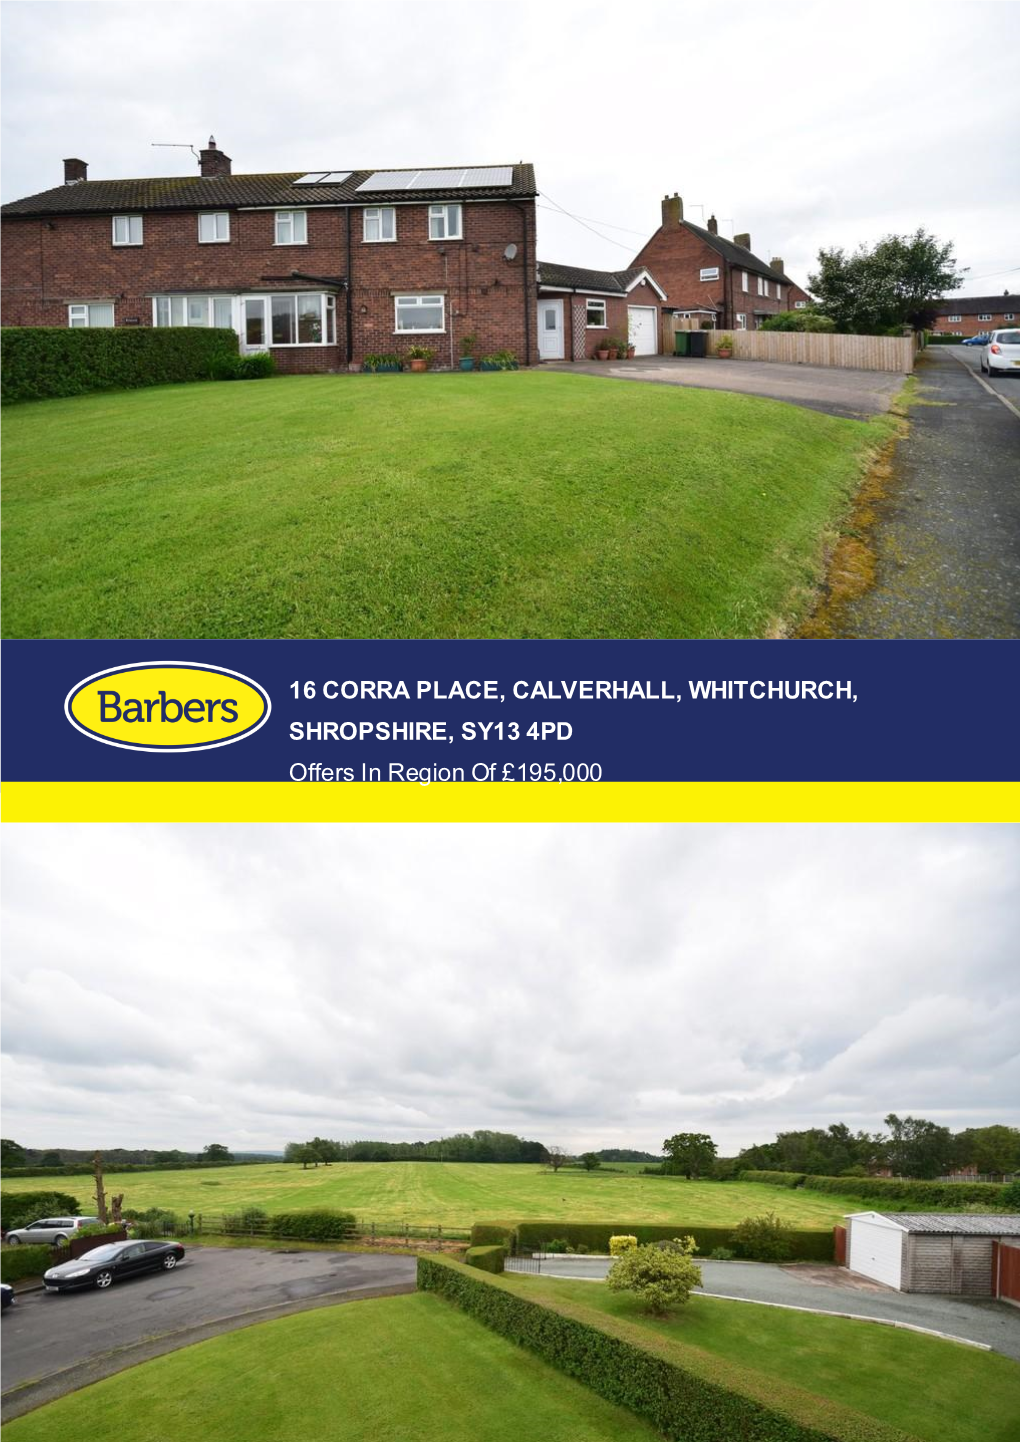 16 Corra Place, Calverhall, Whitchurch, Shropshire, Sy13 4Pd